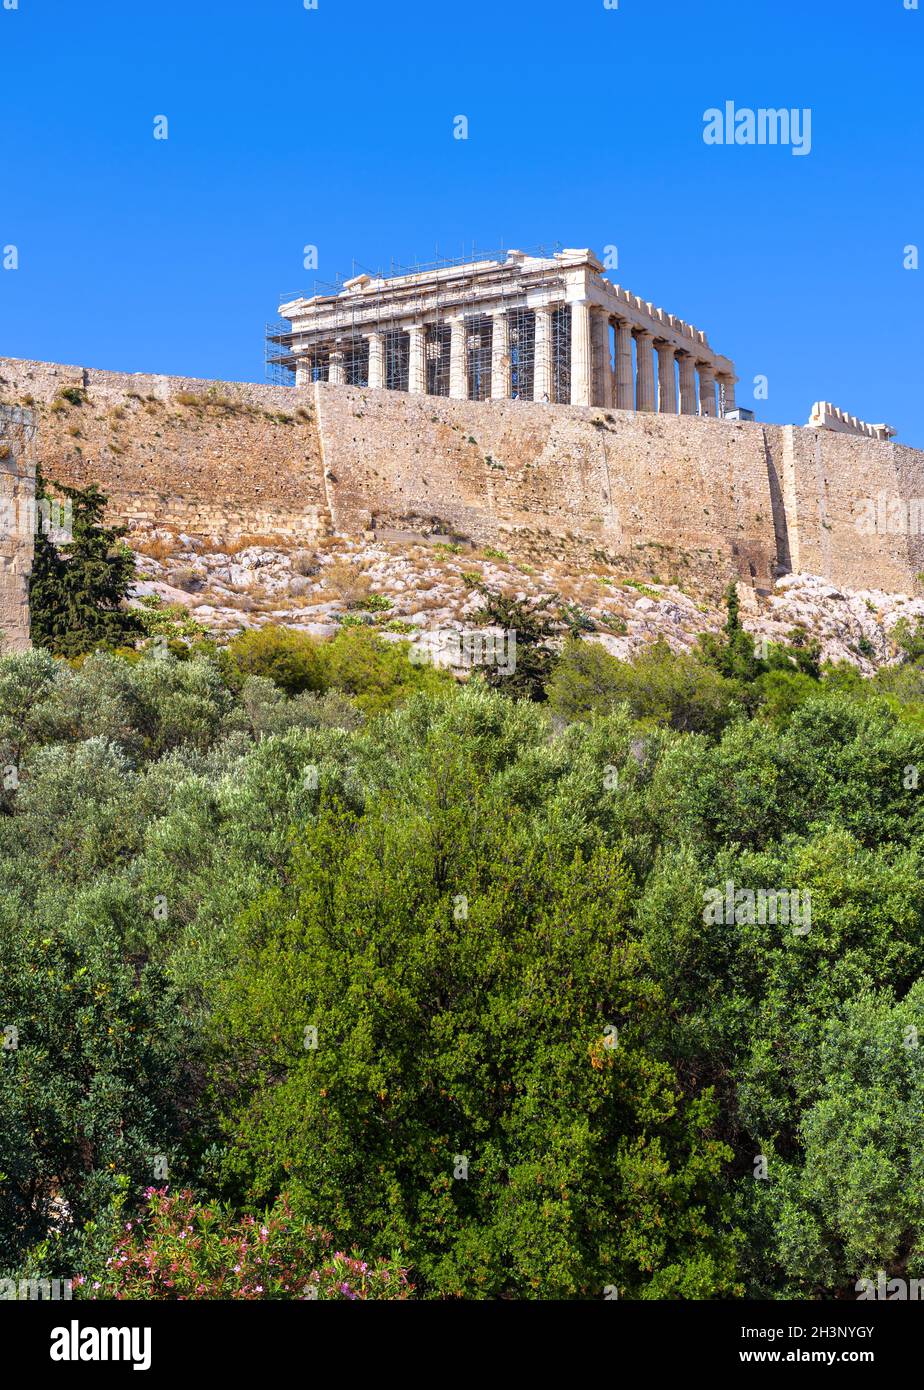 Acropolis of Athens, Greece. Famous Parthenon temple on its top. This place is landmark of Athens. Ancient Greek ruins of Acropolis hill, old architec Stock Photo